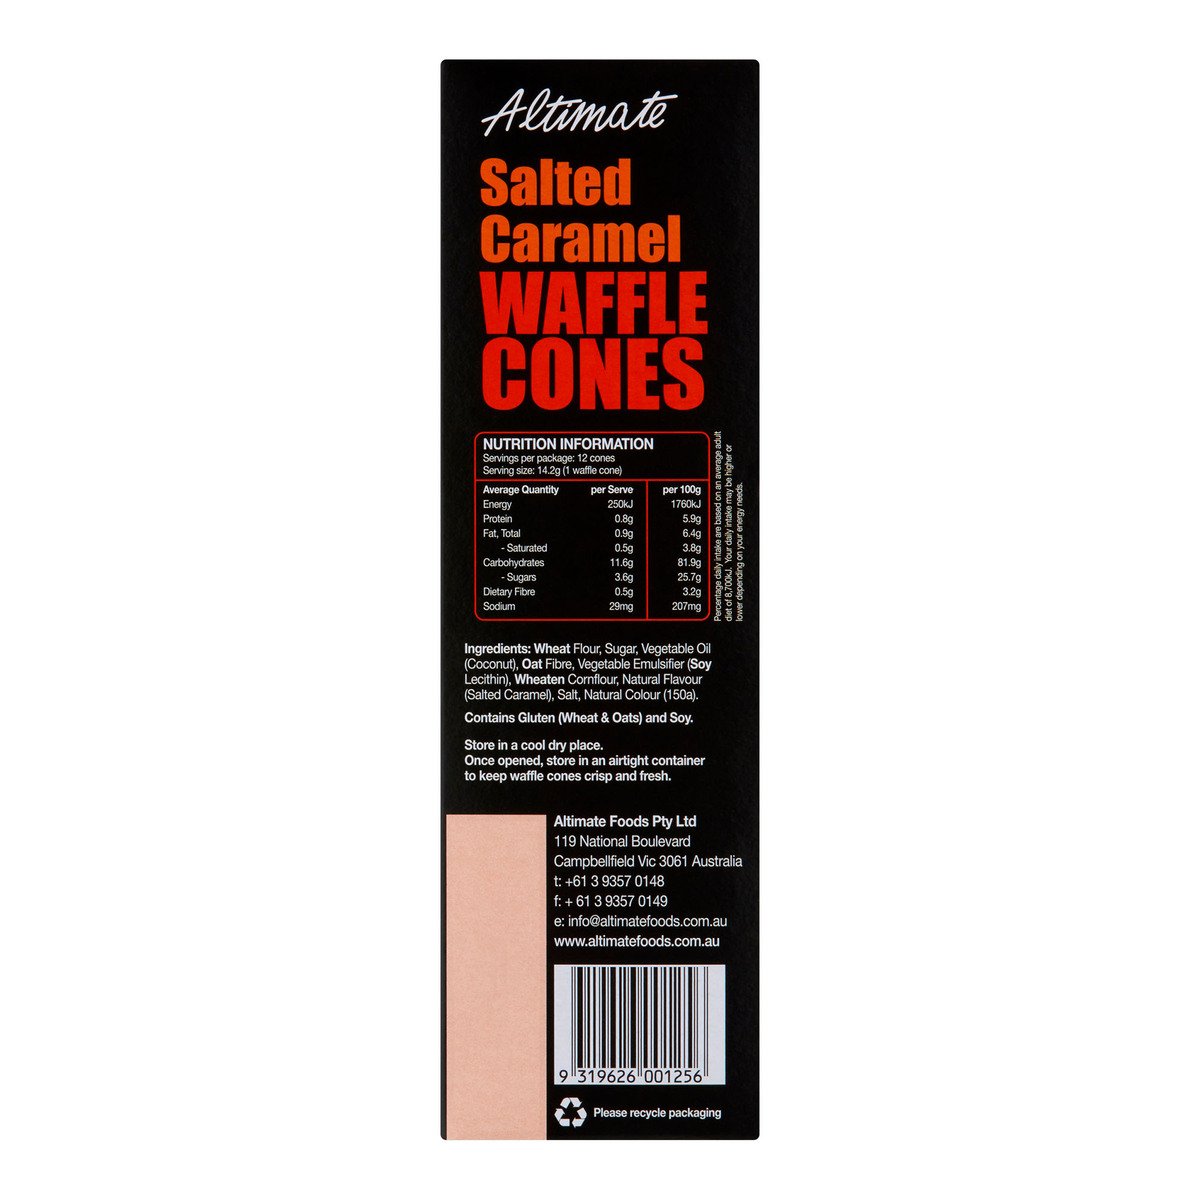 Altimate Salted Caramel Waffle Cones 12 pcs